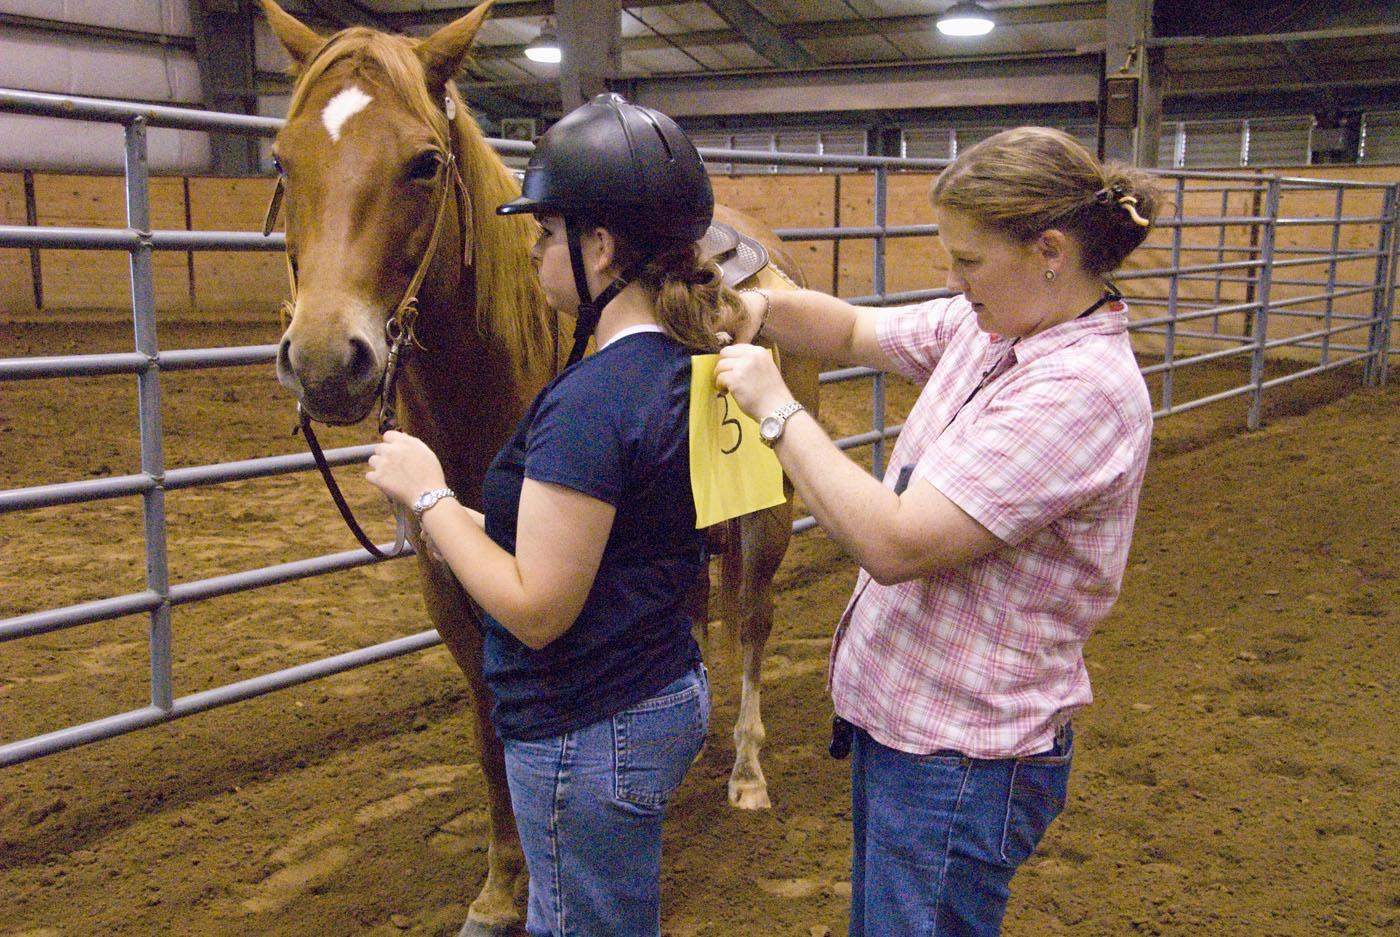 Mississippi State University equestrian team member Megan Dorris, left, steadies her mount while coach Molly Nicodemus pins on her number before an equitation demonstration. (Photo by Marco Nicovich)